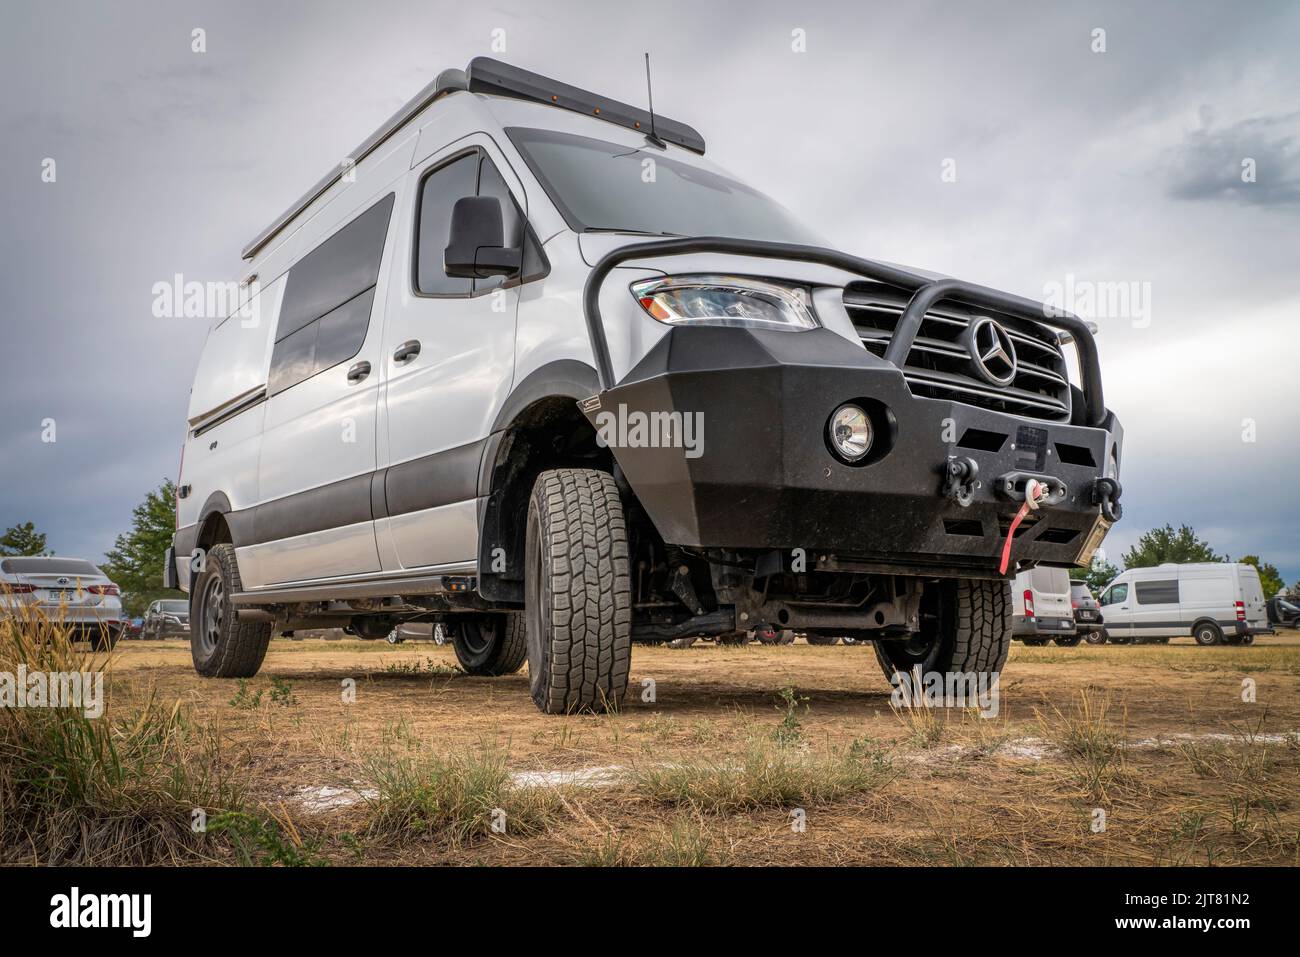 Loveland, CO, USA - August 26, 2022: 4x4 camper van on Mercedes Sprinter chassis with upgraded front bumper and winch for off-road overlanding. Stock Photo